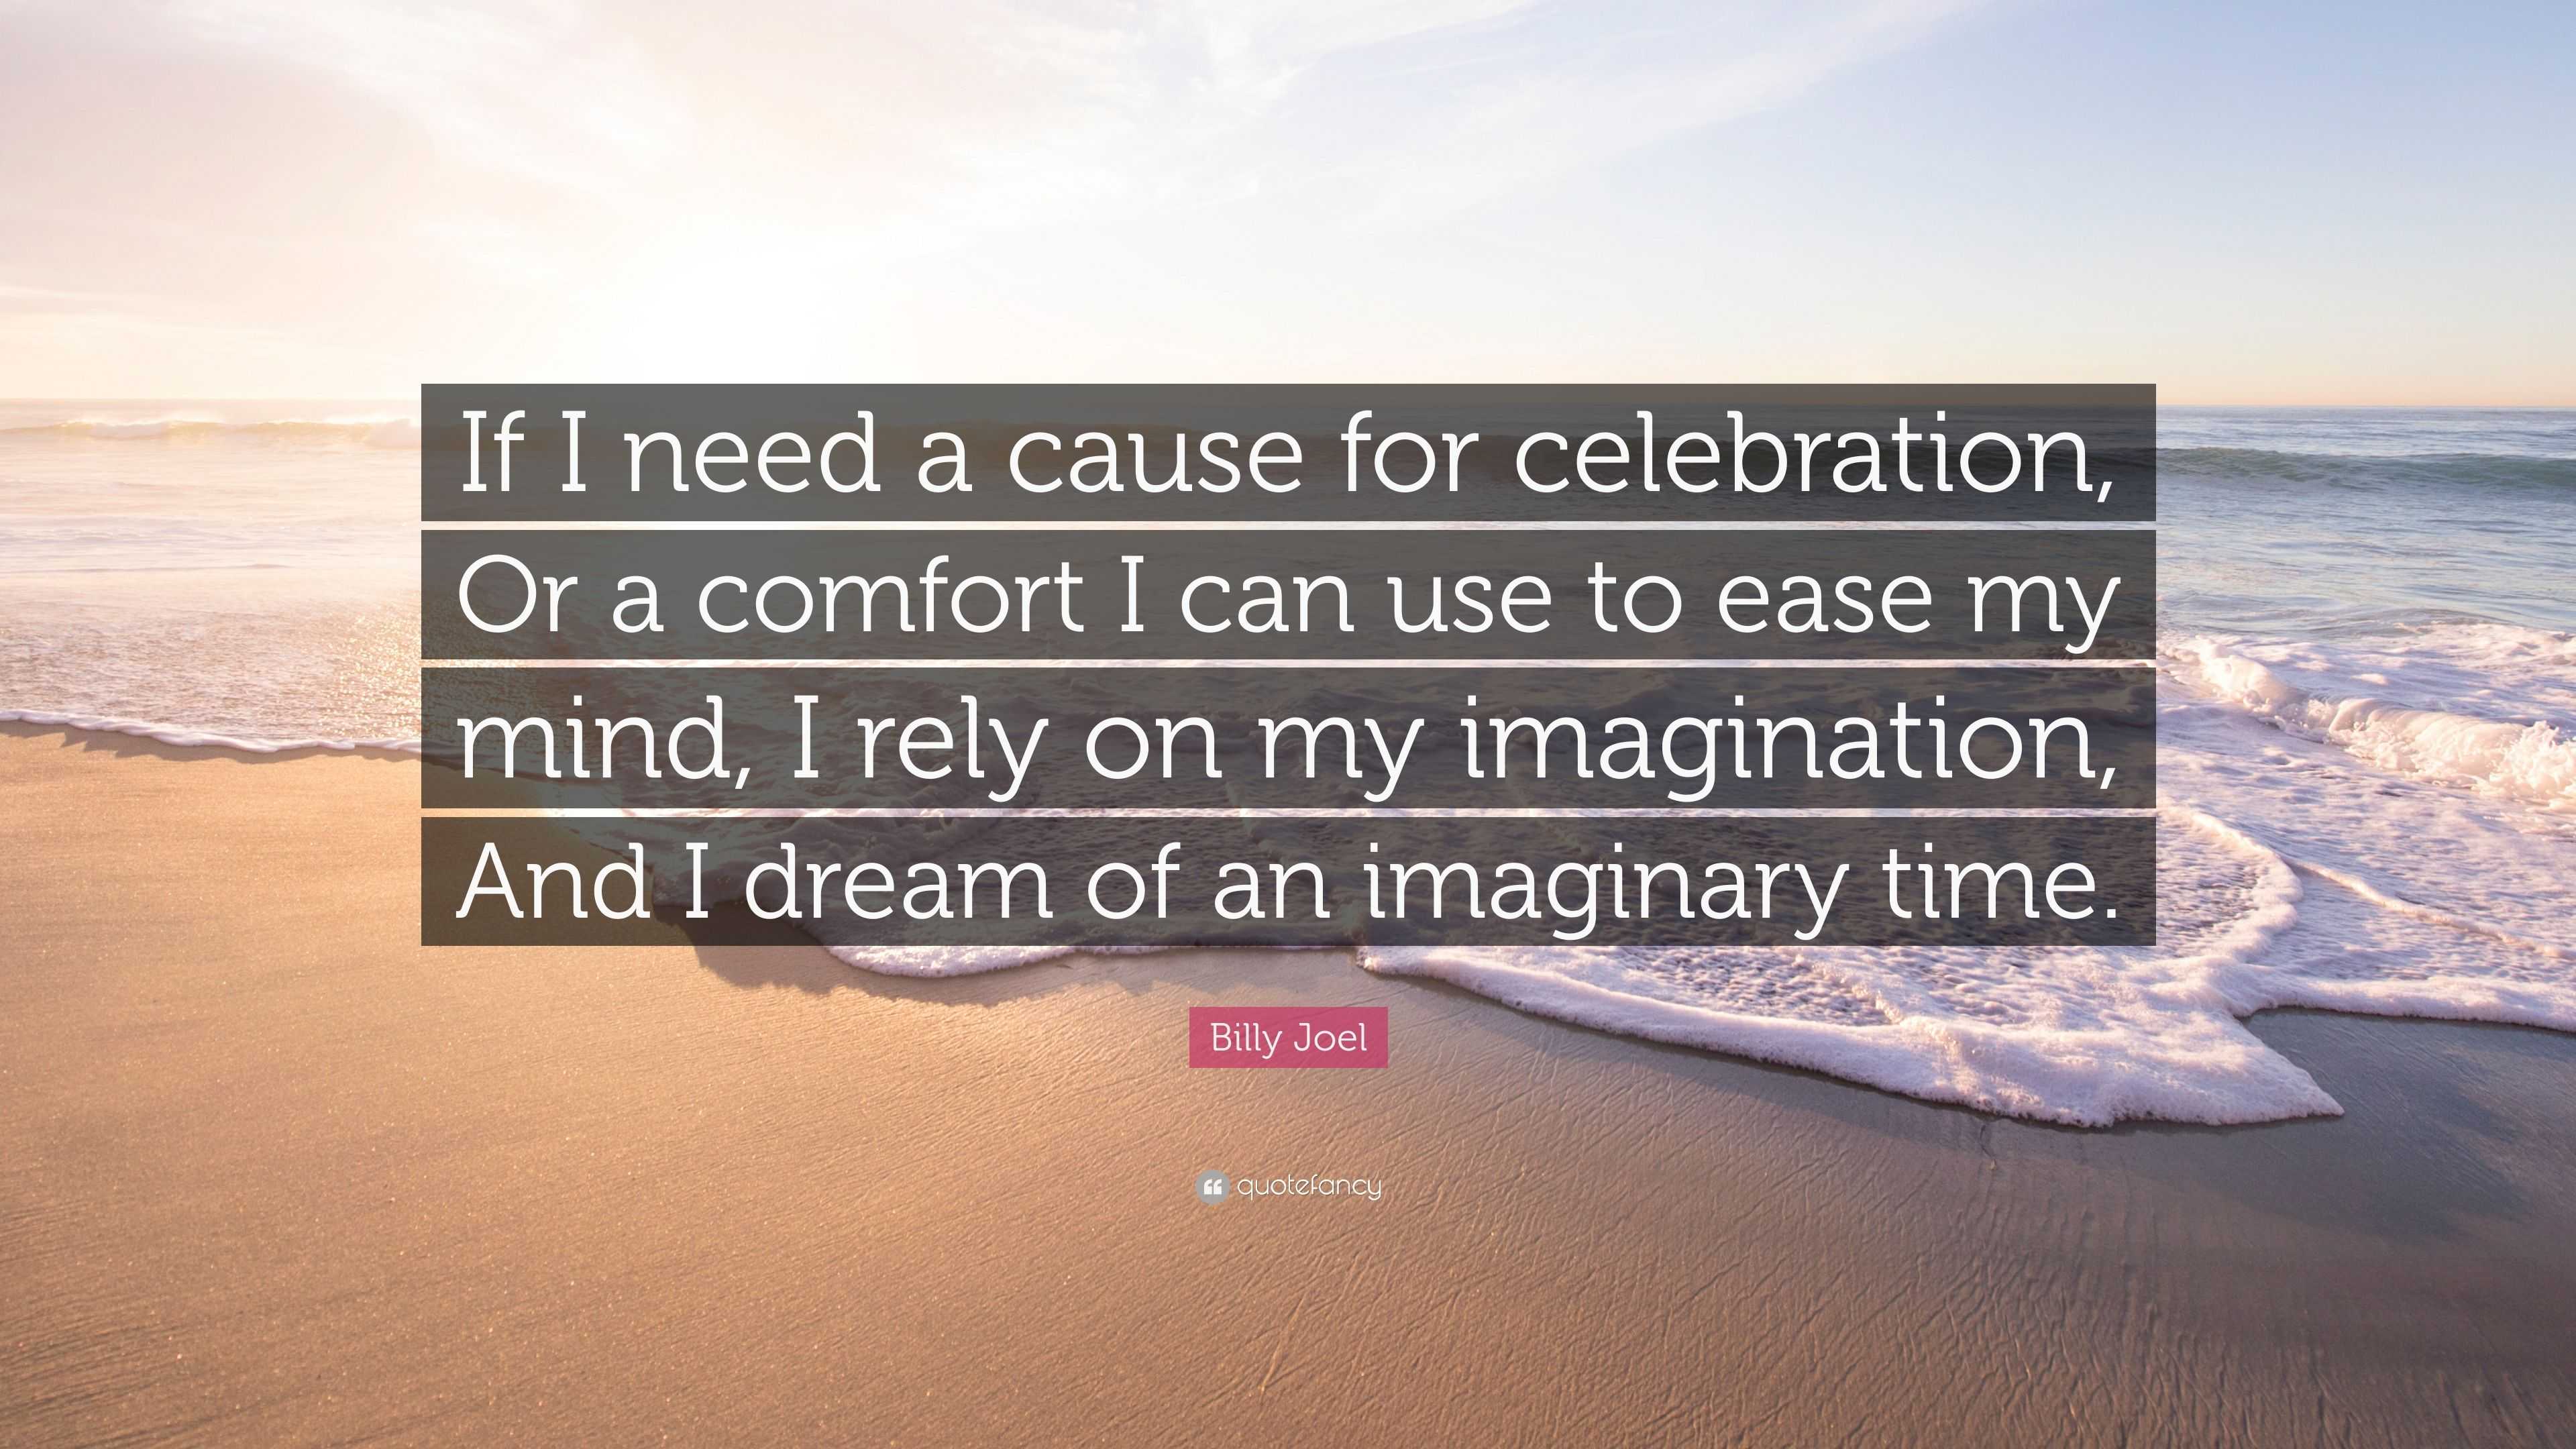 Billy Joel Quote: “If need a cause for celebration, Or a comfort I can use to ease my mind, rely on imagination, And I dream of an i...”